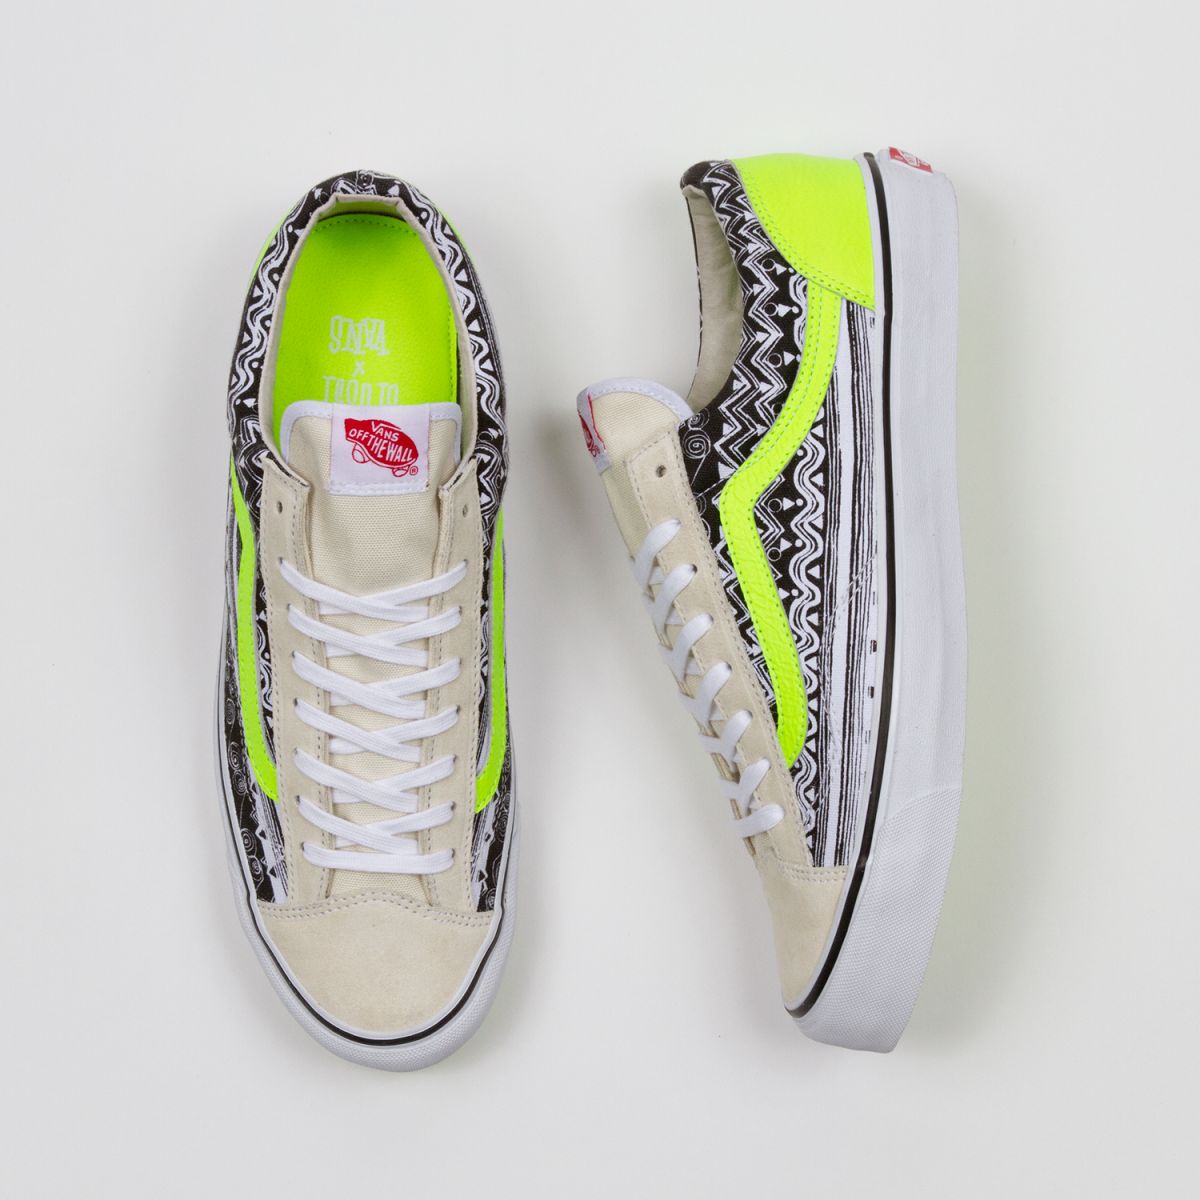 Stussy x Vans Vault Collection for Spring 2014 | Sole Collector